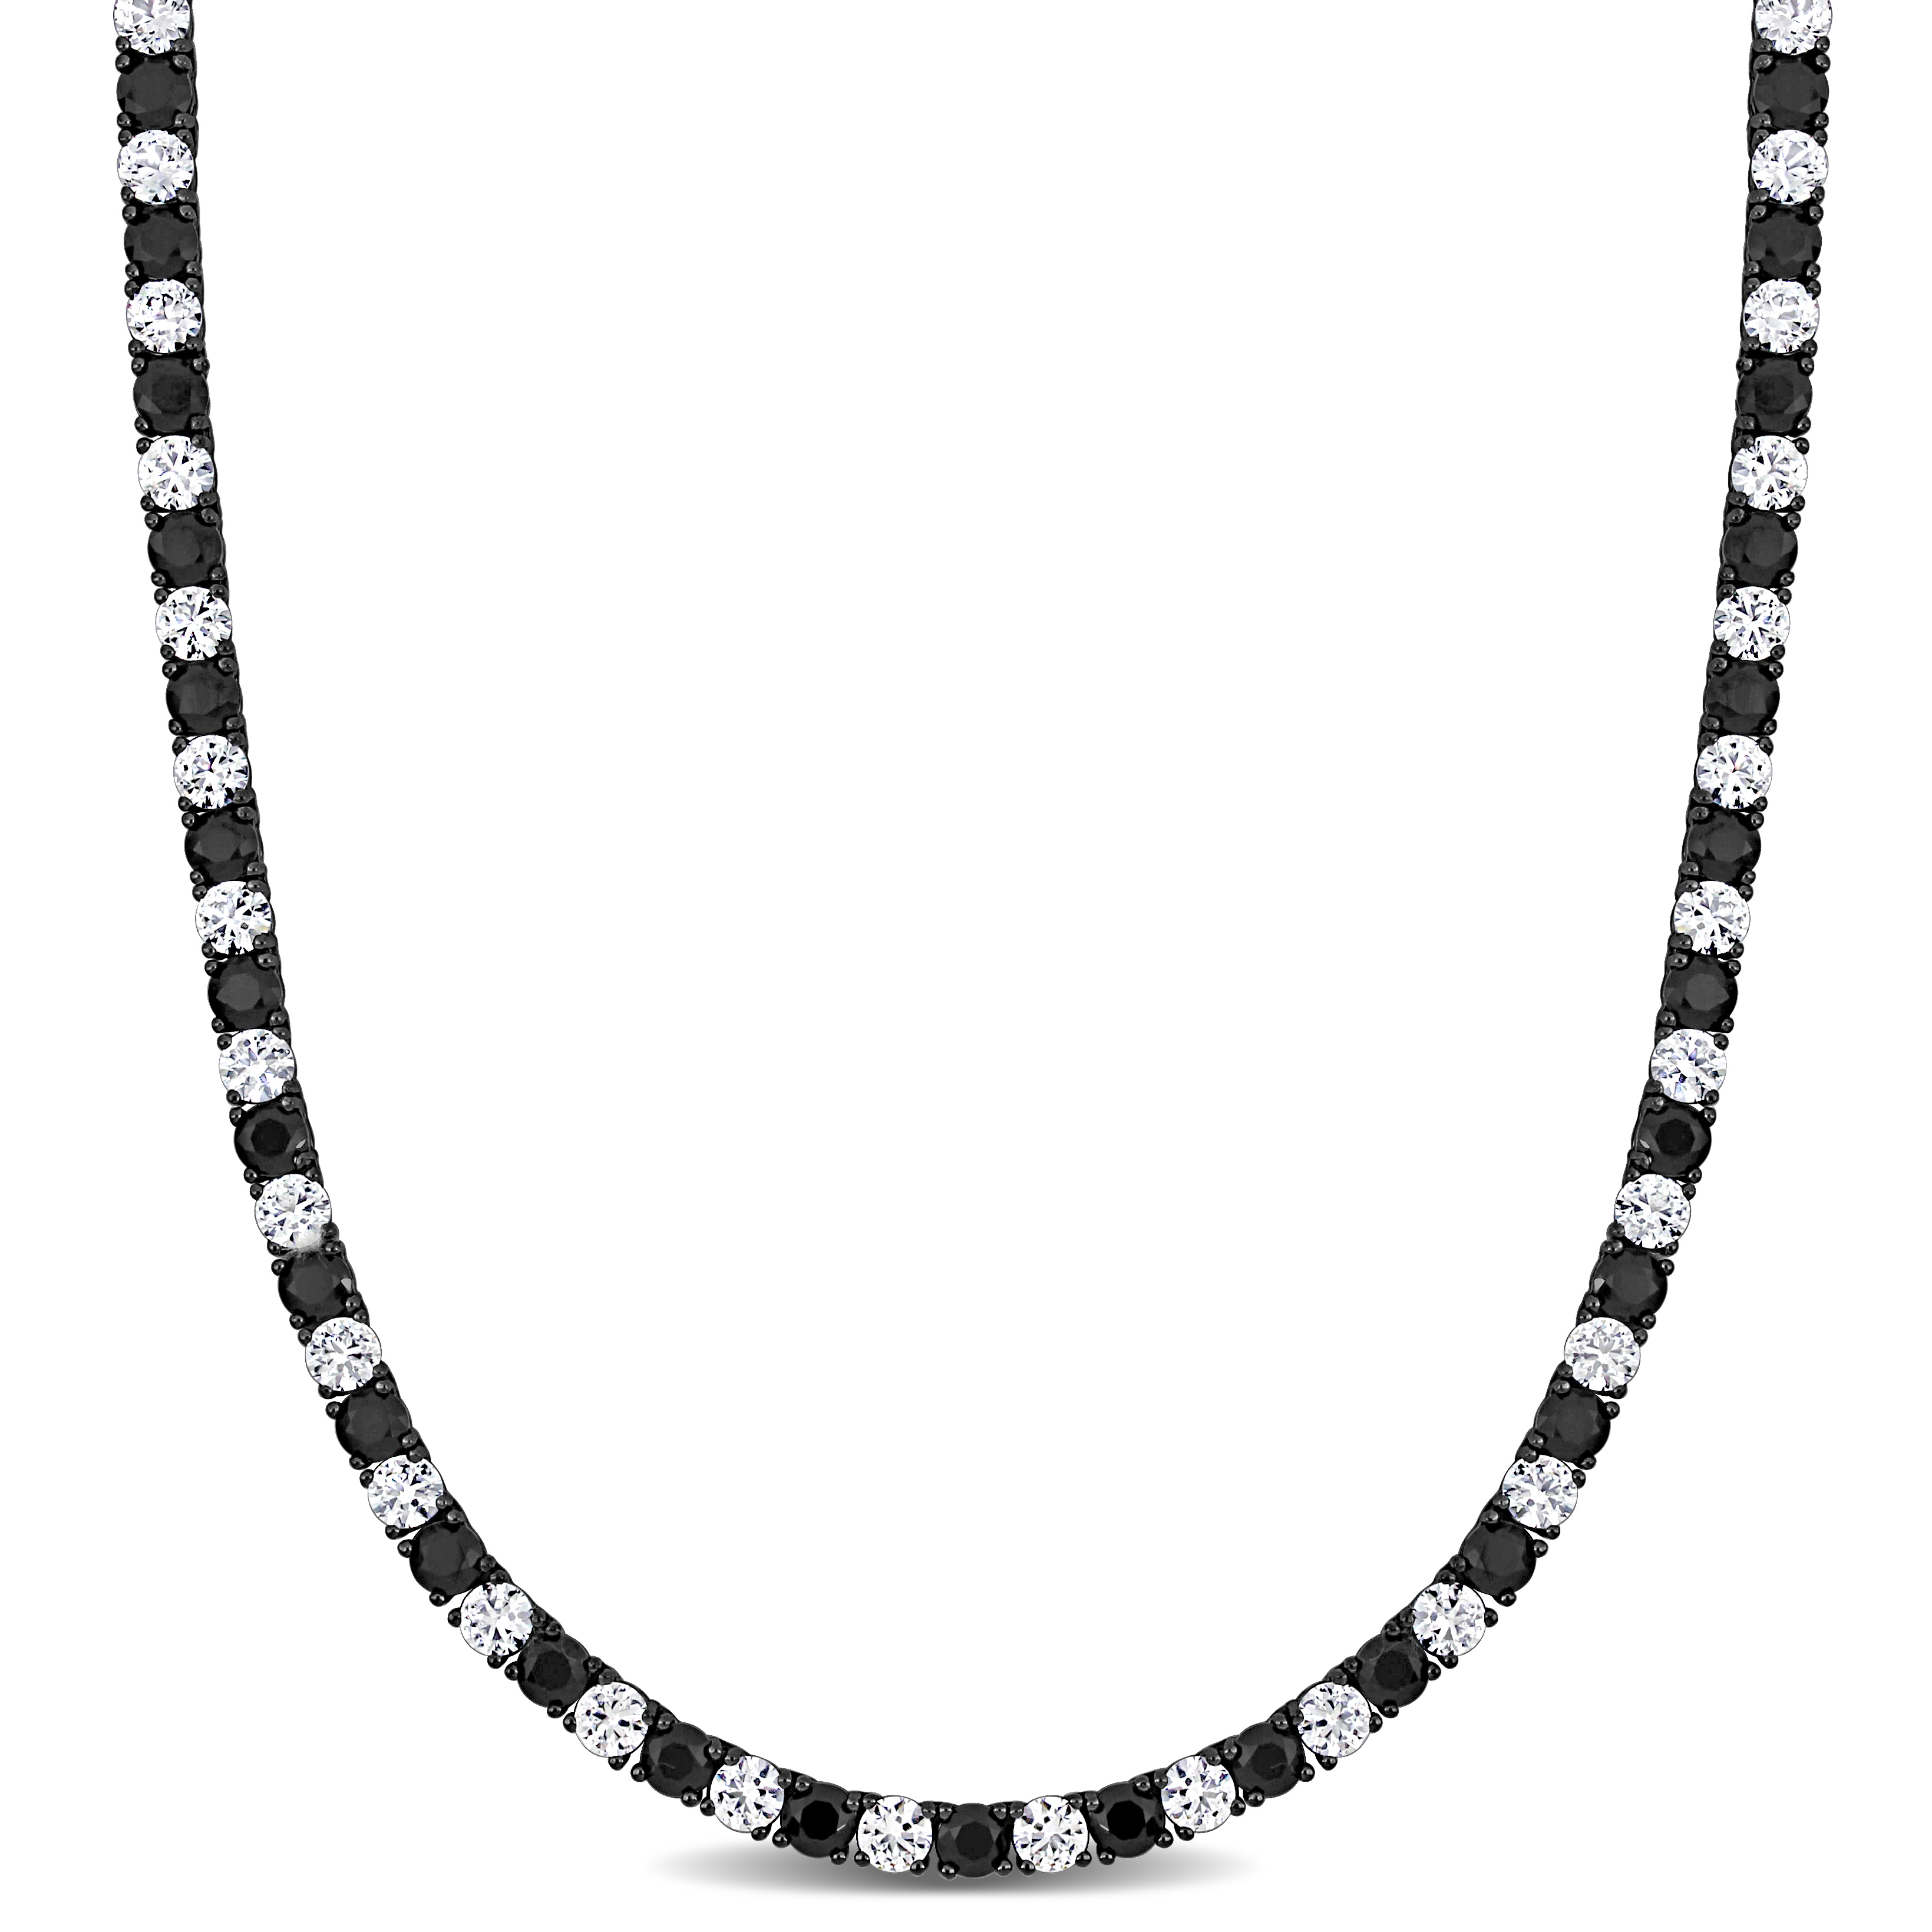 40 CT TGW Created Black and White Sapphire Classic Tennis Men's Necklace in Black Rhodium Plated Sterling Silver - 20 in.